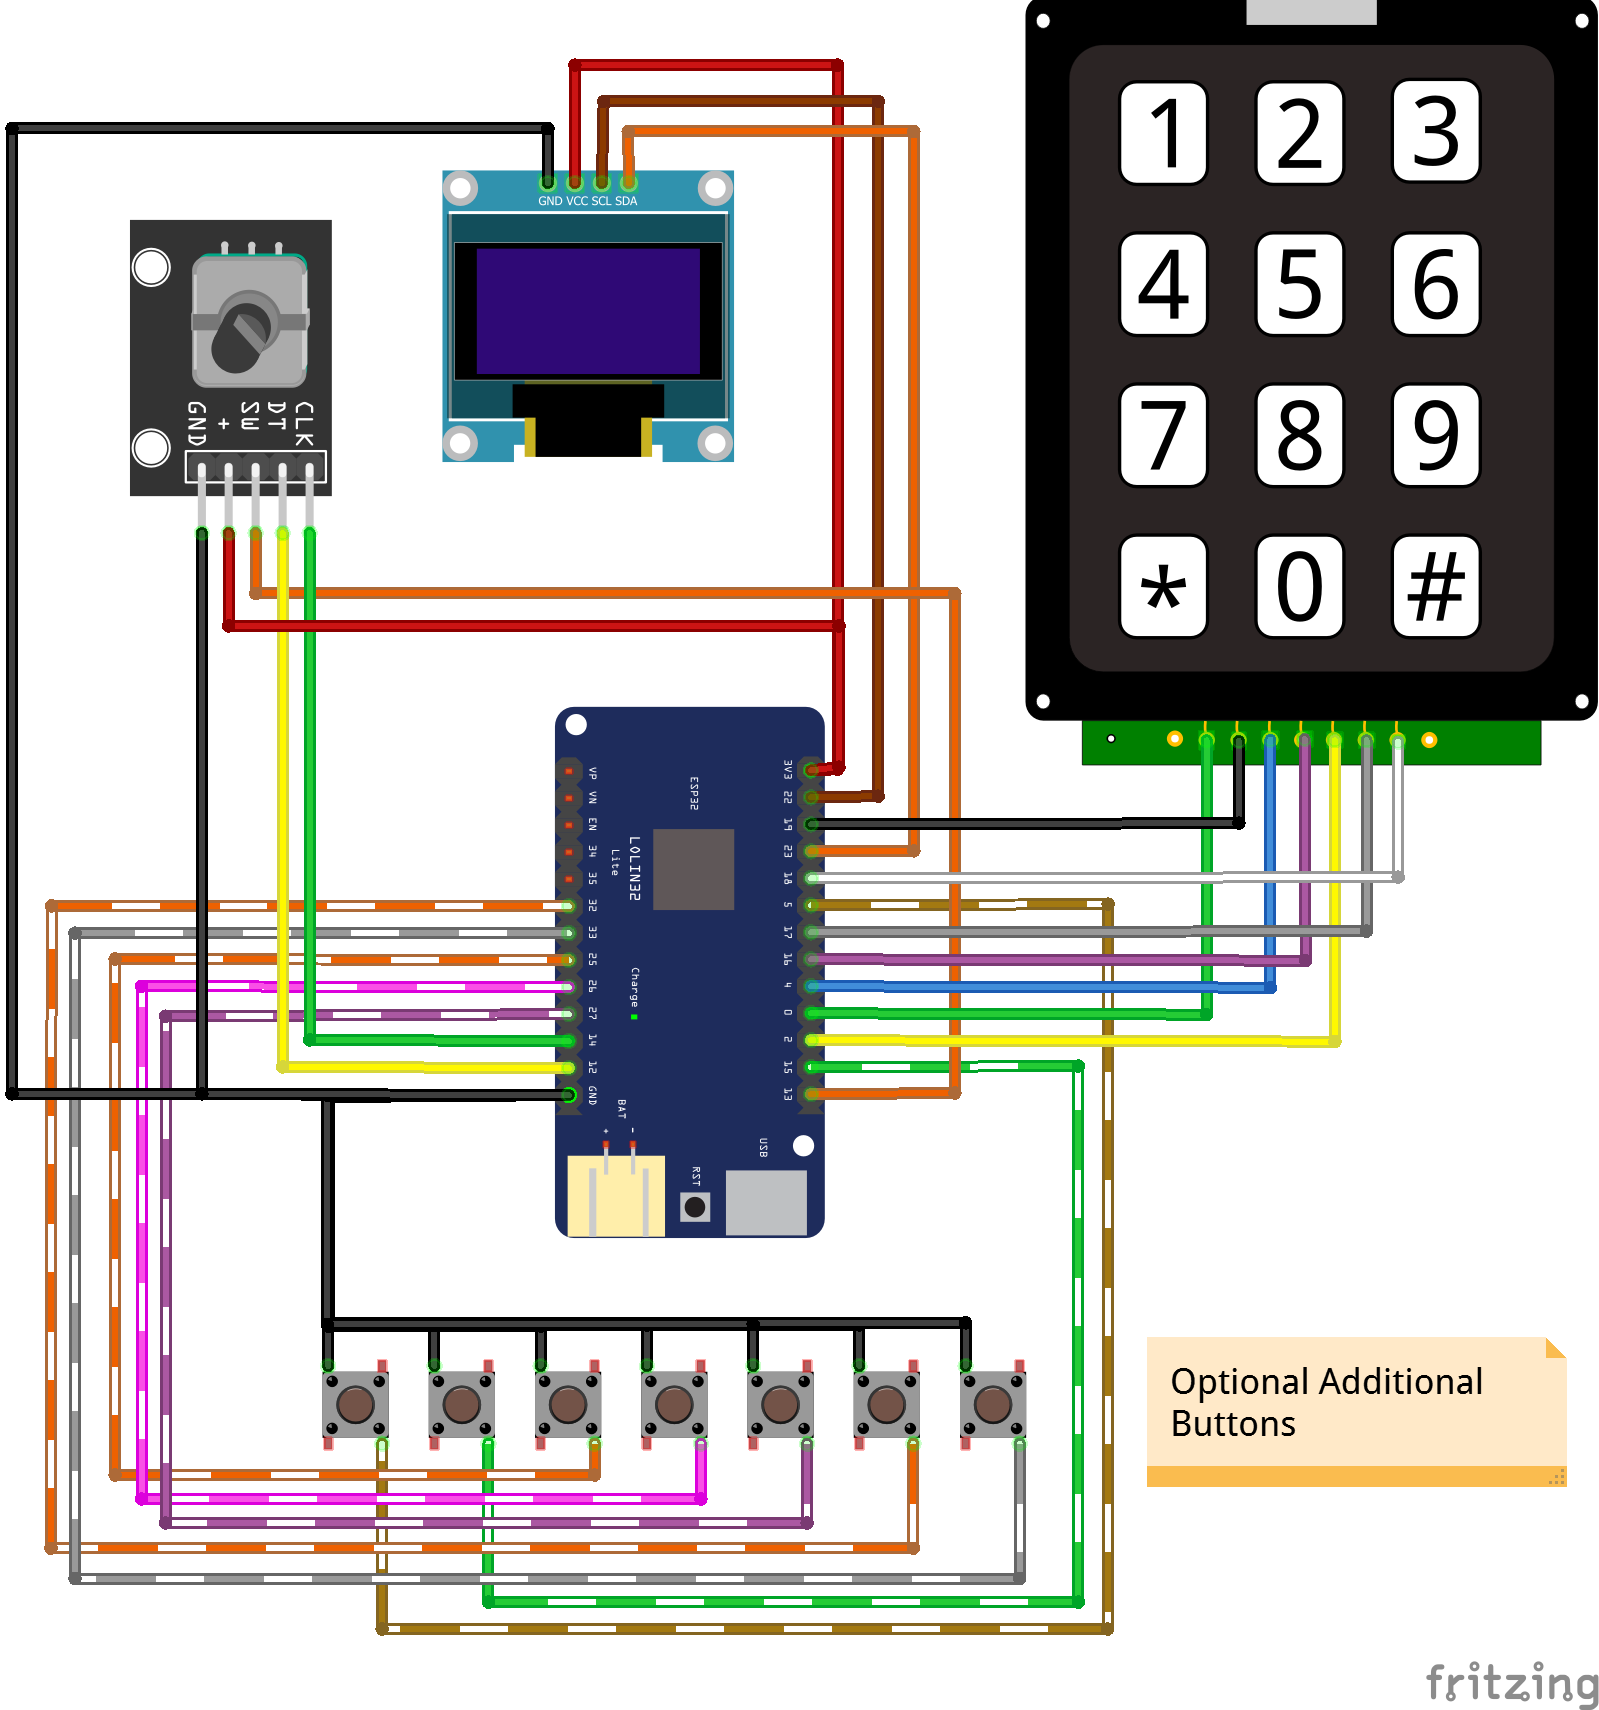 Assembly diagram - Optional Additional Buttons